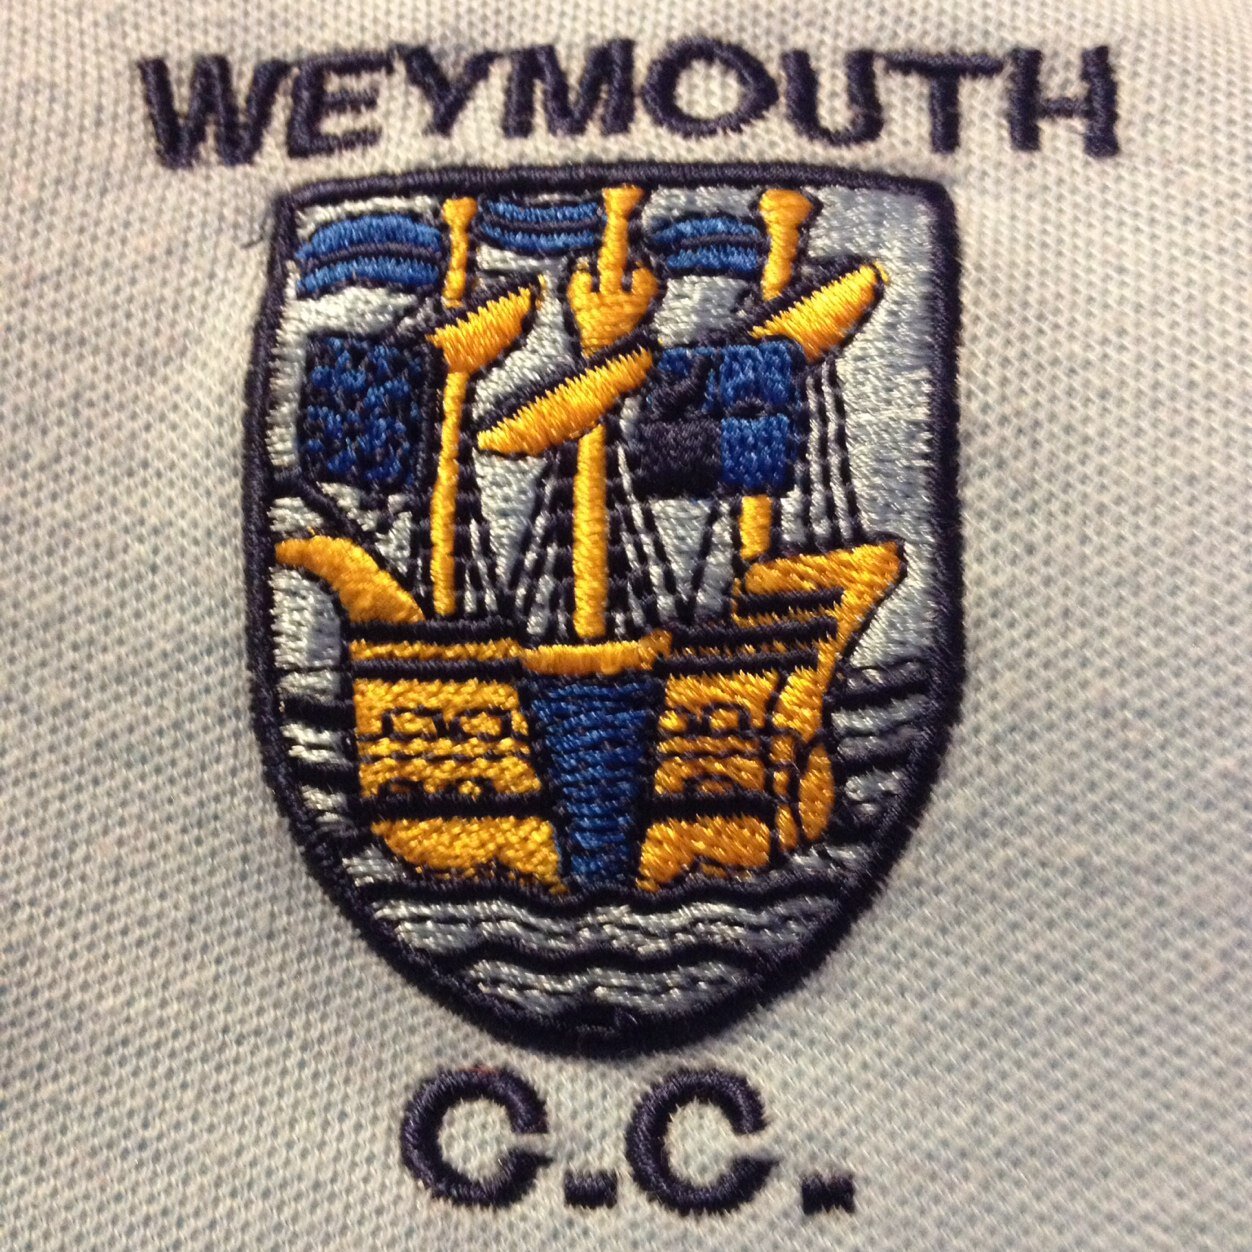 Official Account for Weymouth CC. News, events and live scores will be up to date throughout the year.